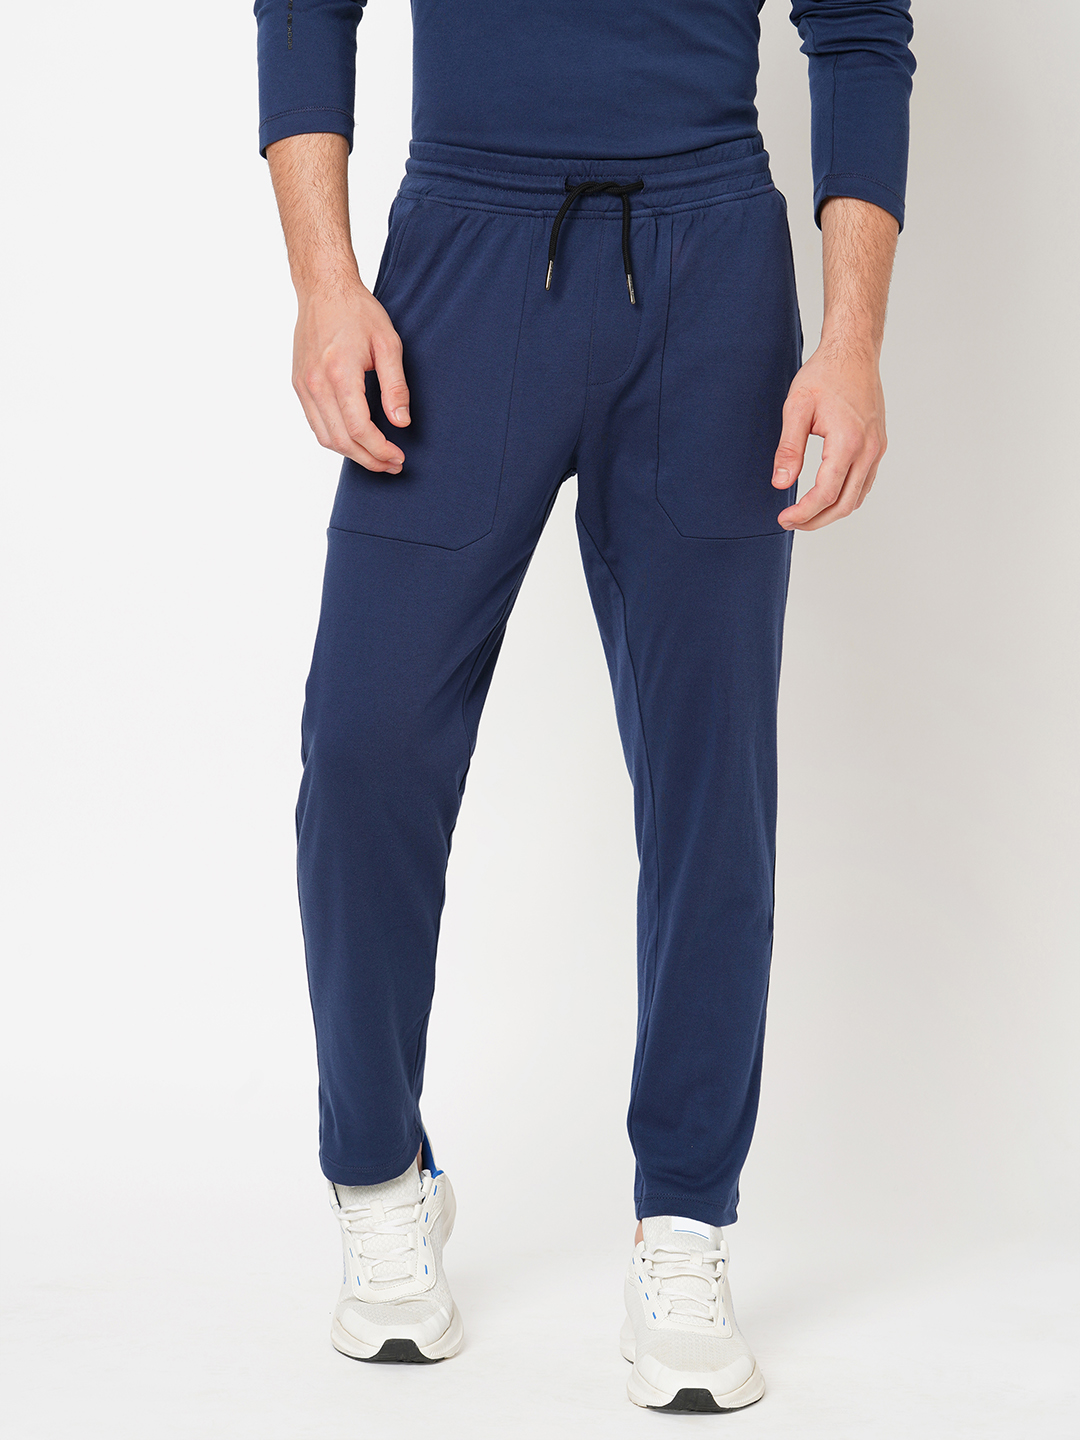 NAVY ATHLEISURE TRACK PANT (COMFORT FIT)